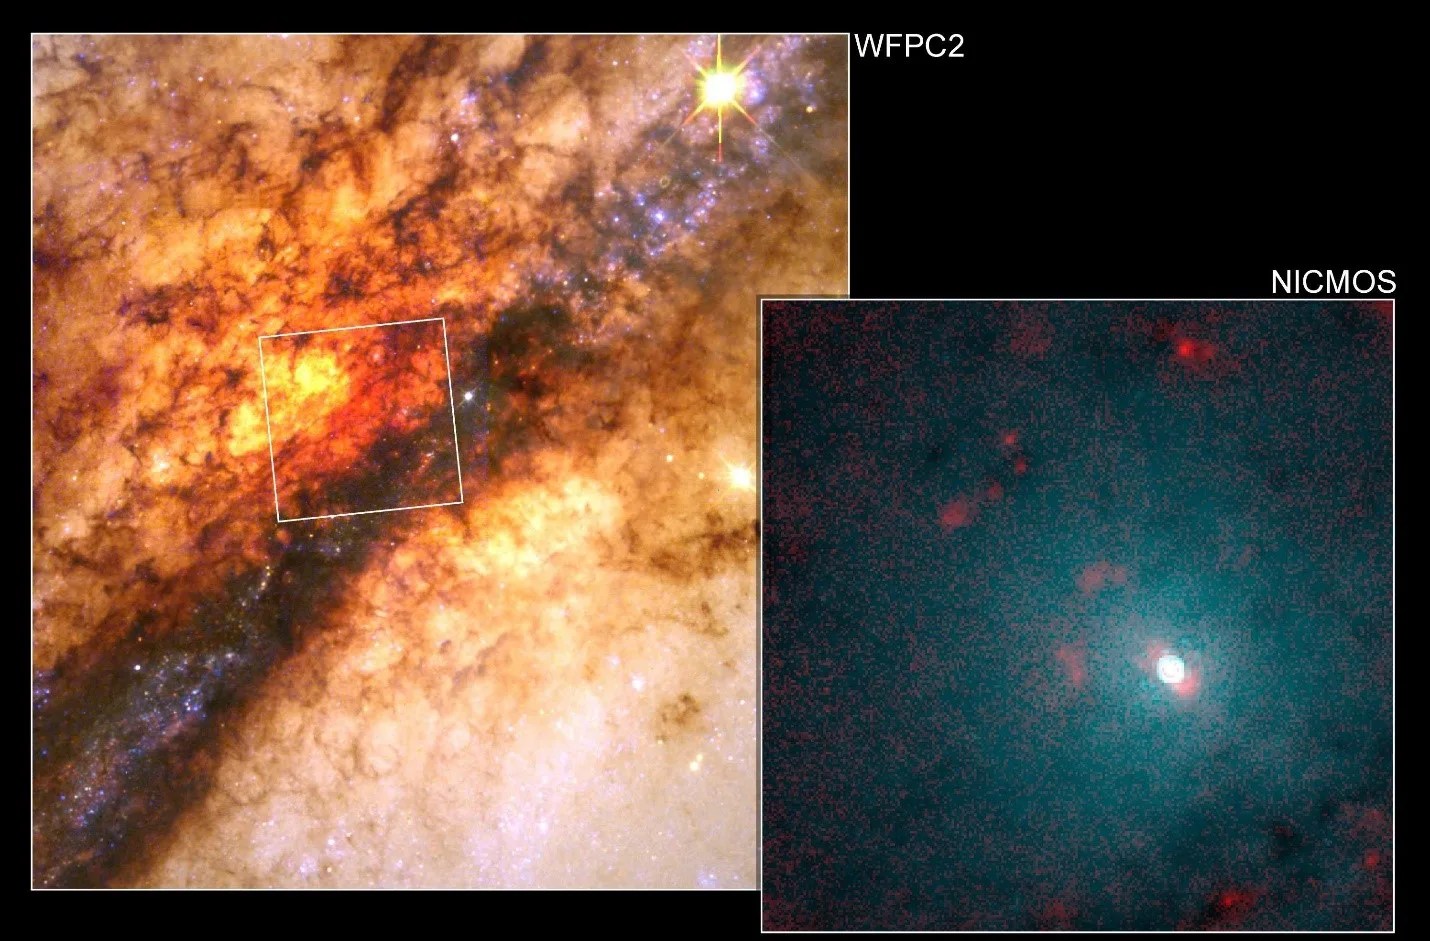 An image in the lower right shows the bright core of Centaurus A, a bright white region, surounded by red patches immediately to the upper left and lower right of the core. On the left, a white square in the Wide Field shows a Hubble image of the center of Centaurus A, a bright yellow glowing region filled with dark dust lanes.